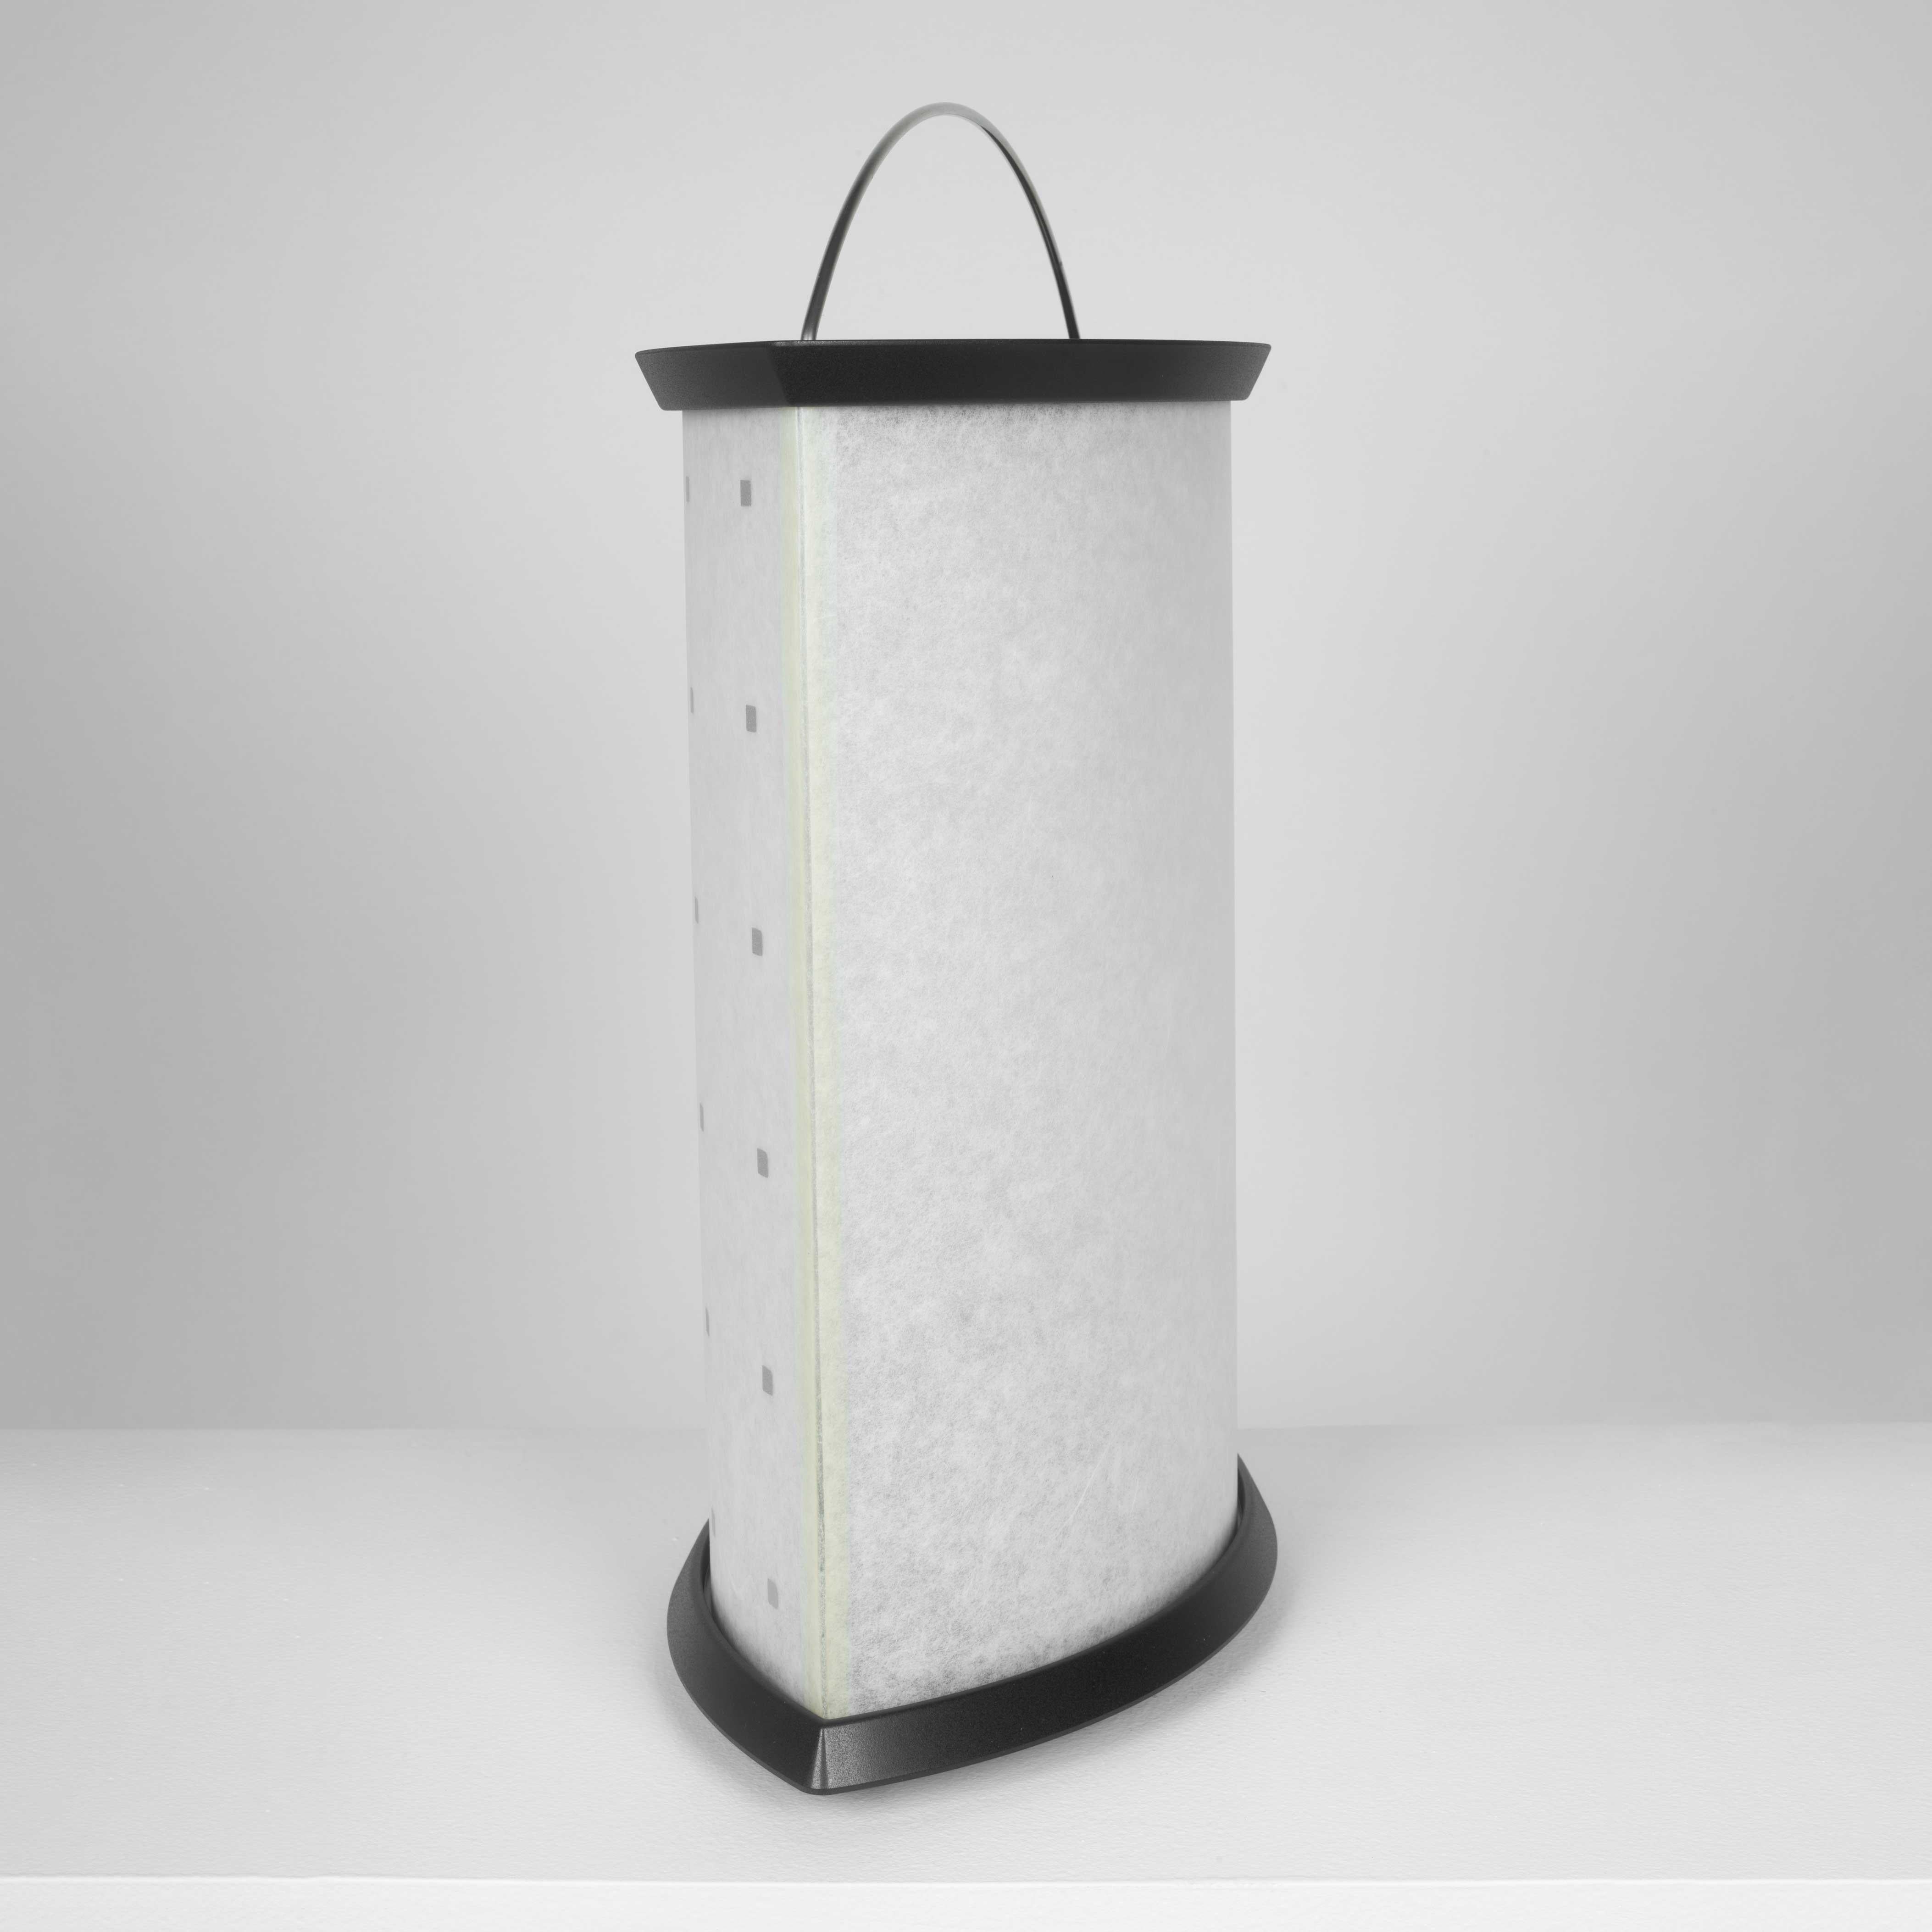 'Be-Andon’ Lantern Lamp by Masanori Umeda for Yamagiwa, 1996, Japan In Excellent Condition For Sale In Chicago, IL